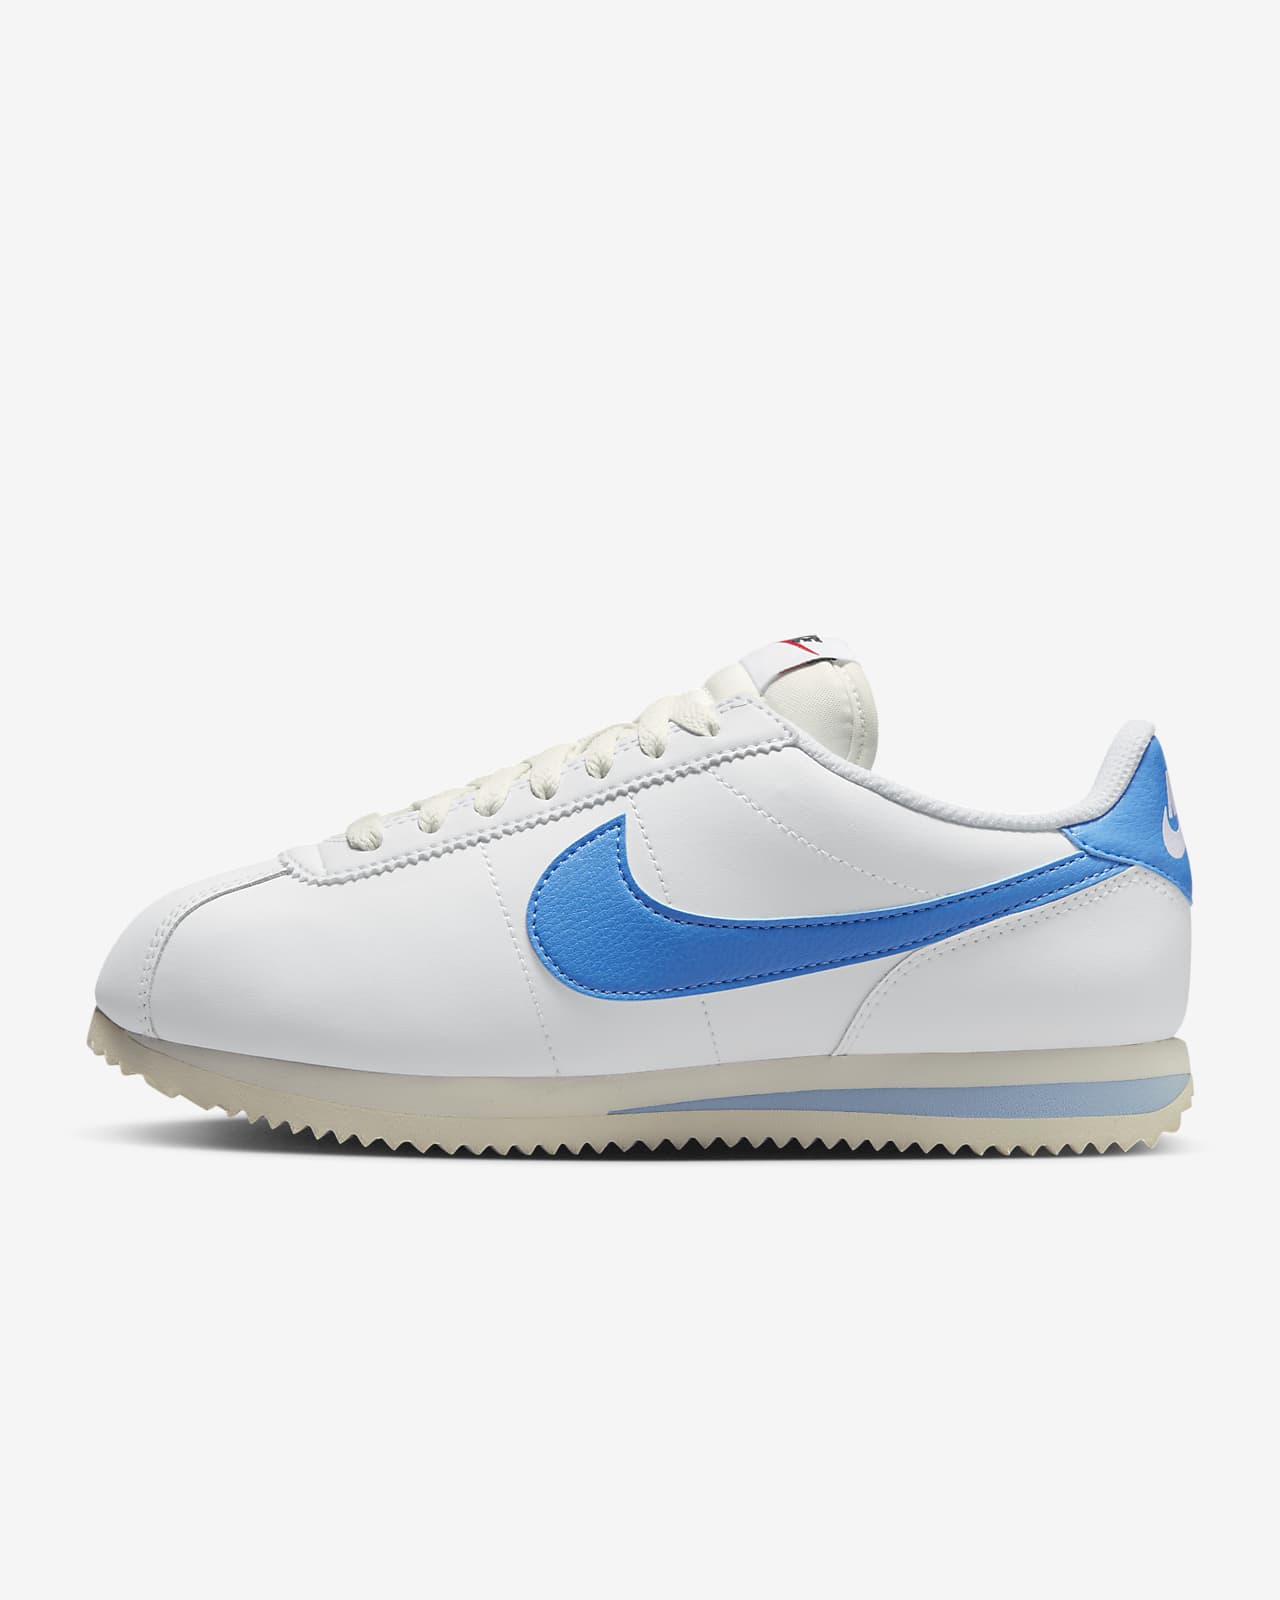 Nike Women's Cortez Shoes (White/Blue or White/Red) from $51.18 + Free Shipping